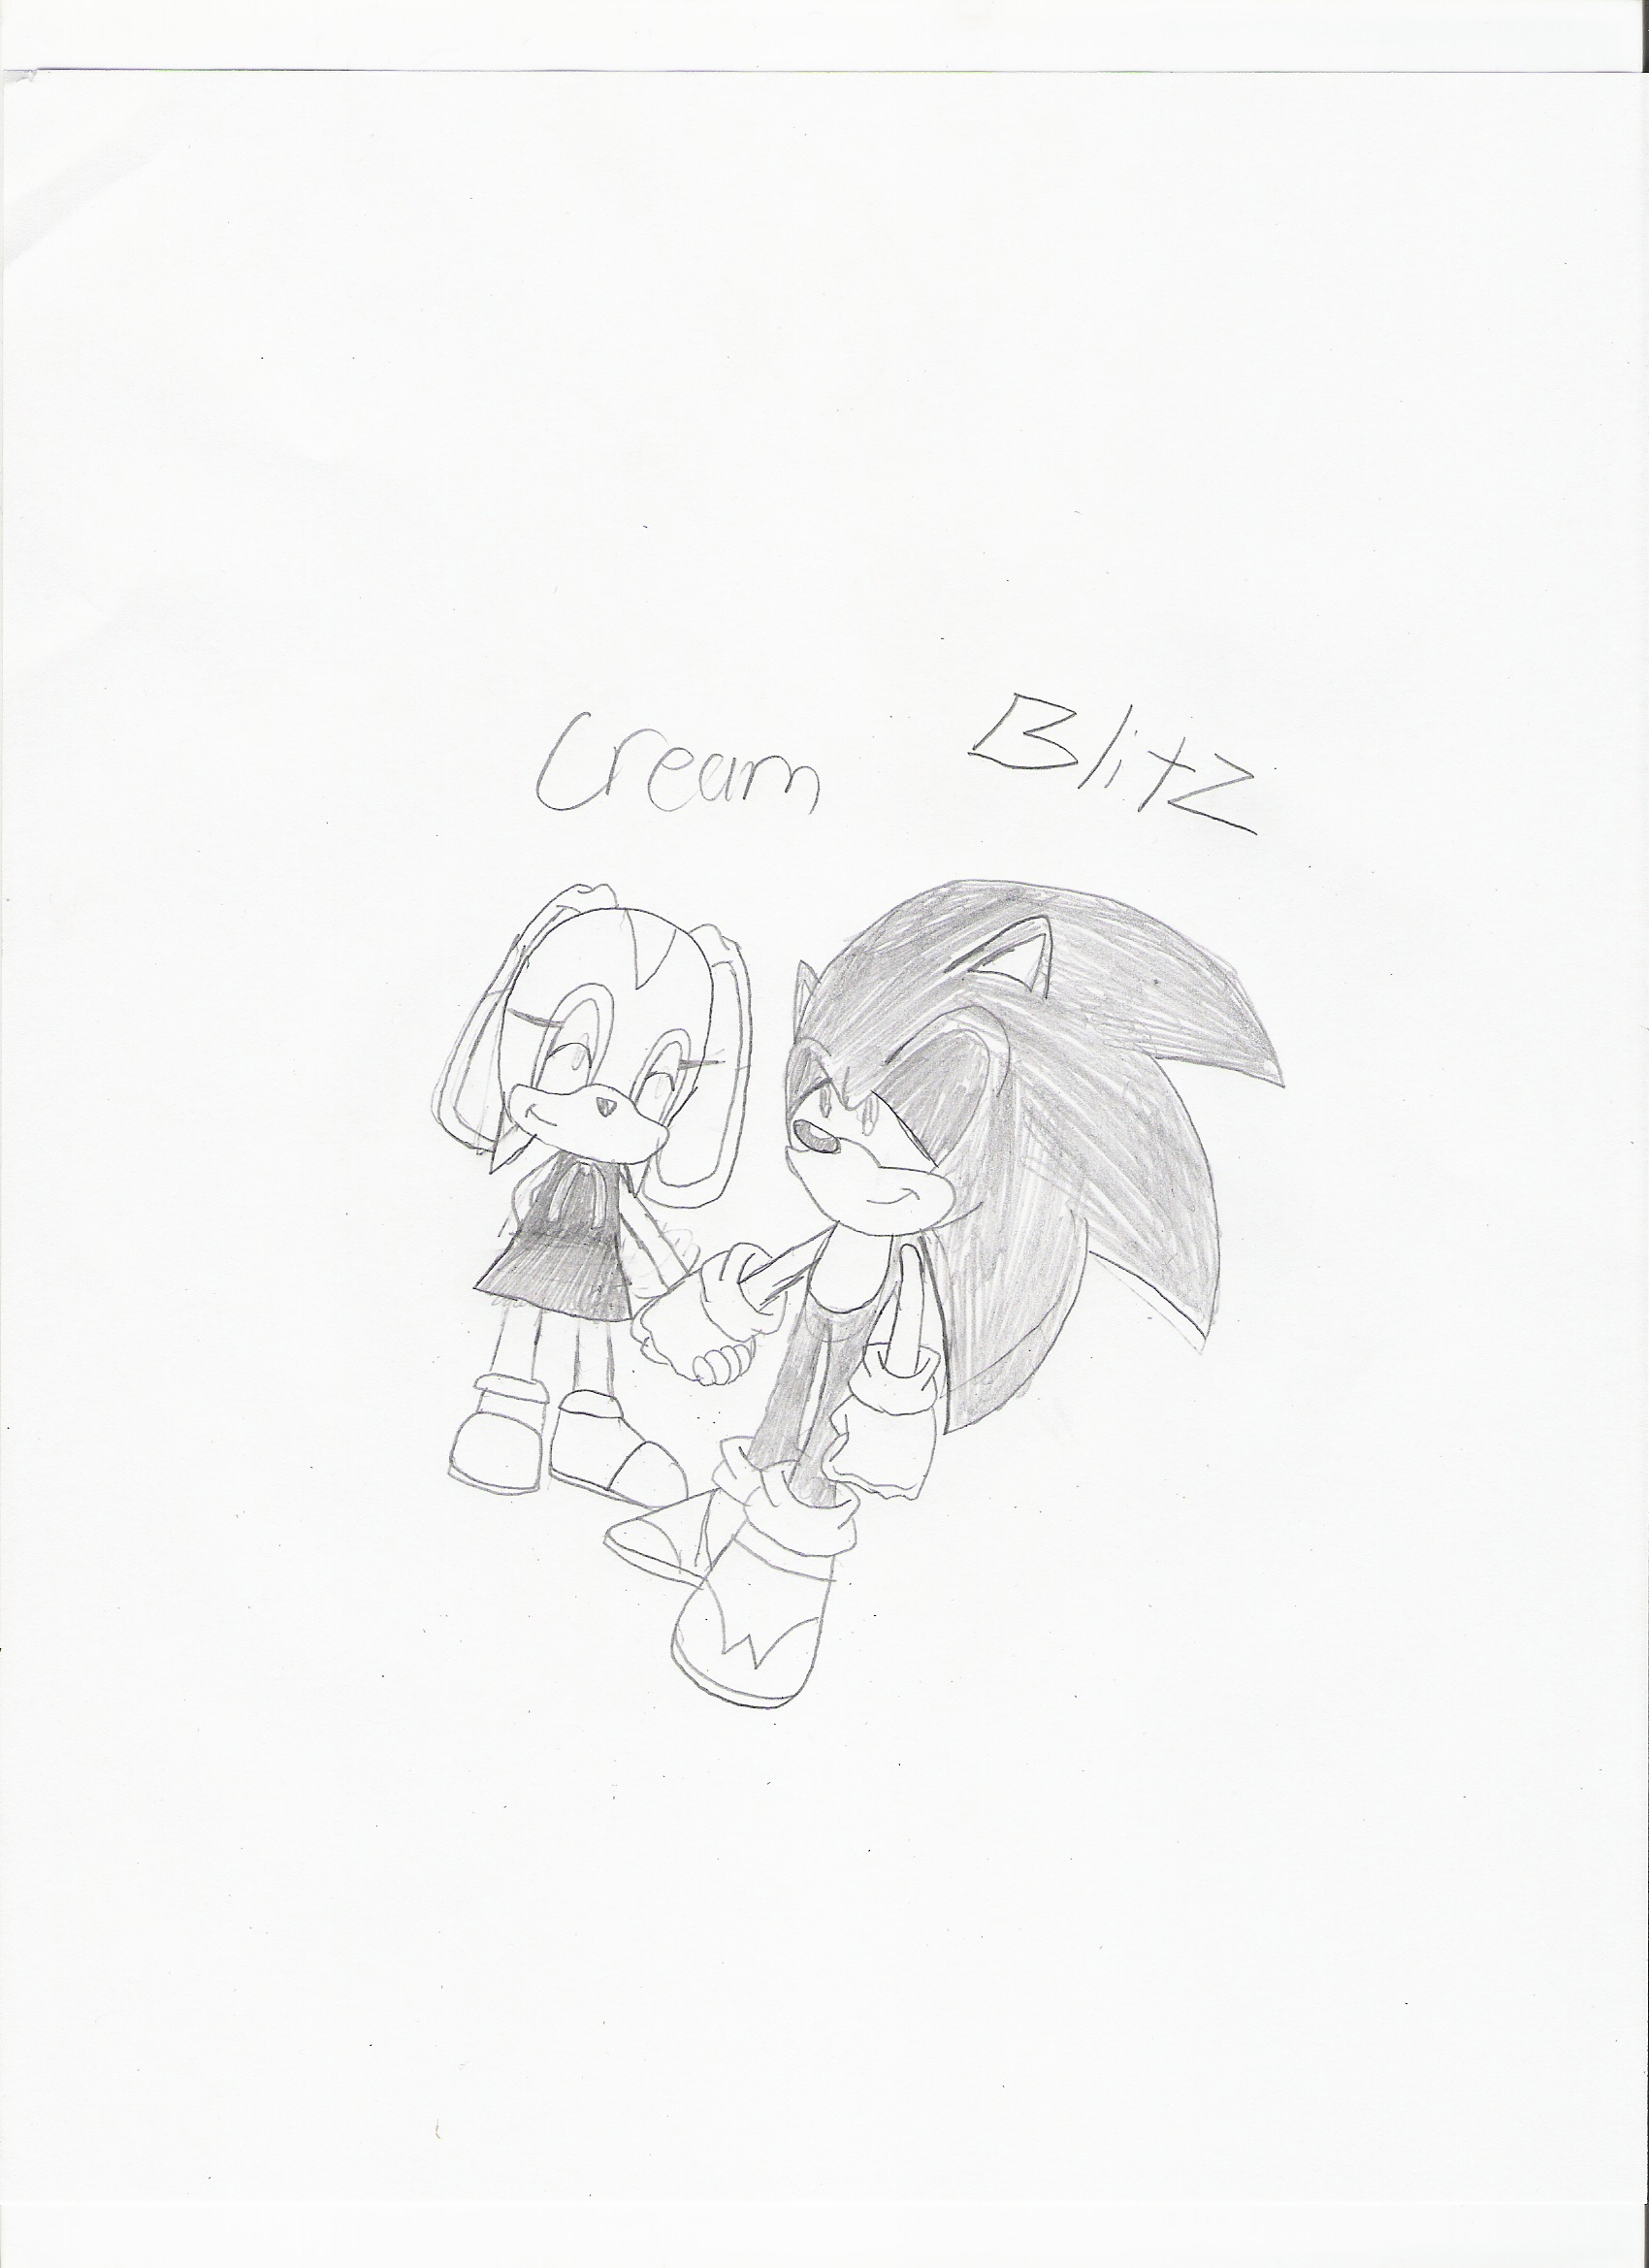 Blitz and Cream by Marluxia1445679011